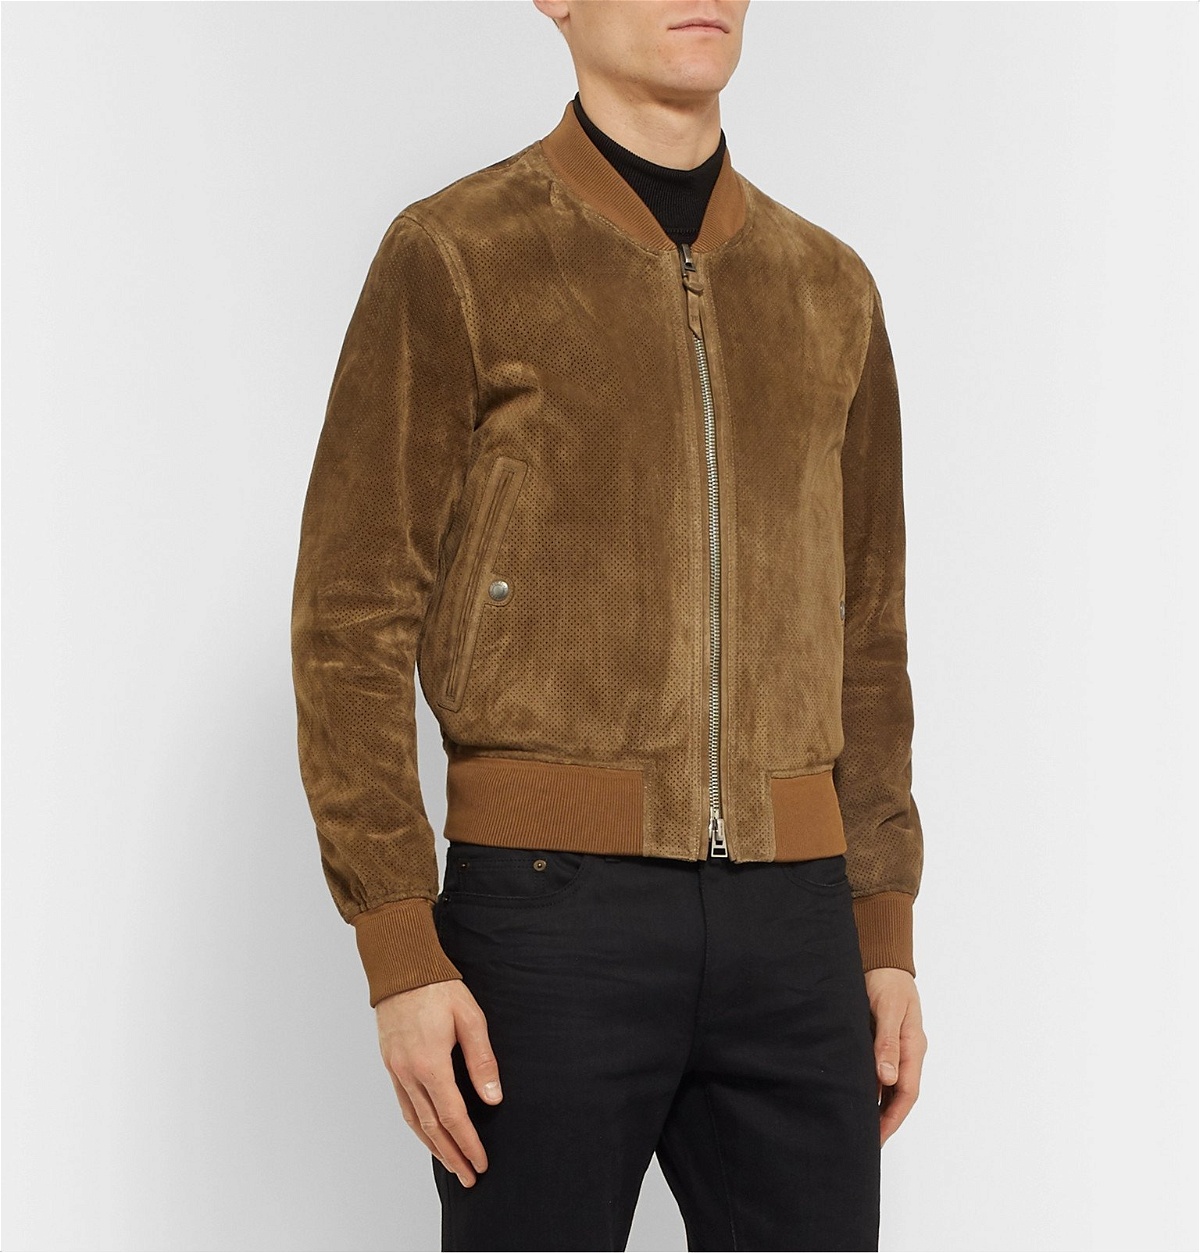 TOM FORD - Perforated Suede Bomber Jacket - Brown TOM FORD